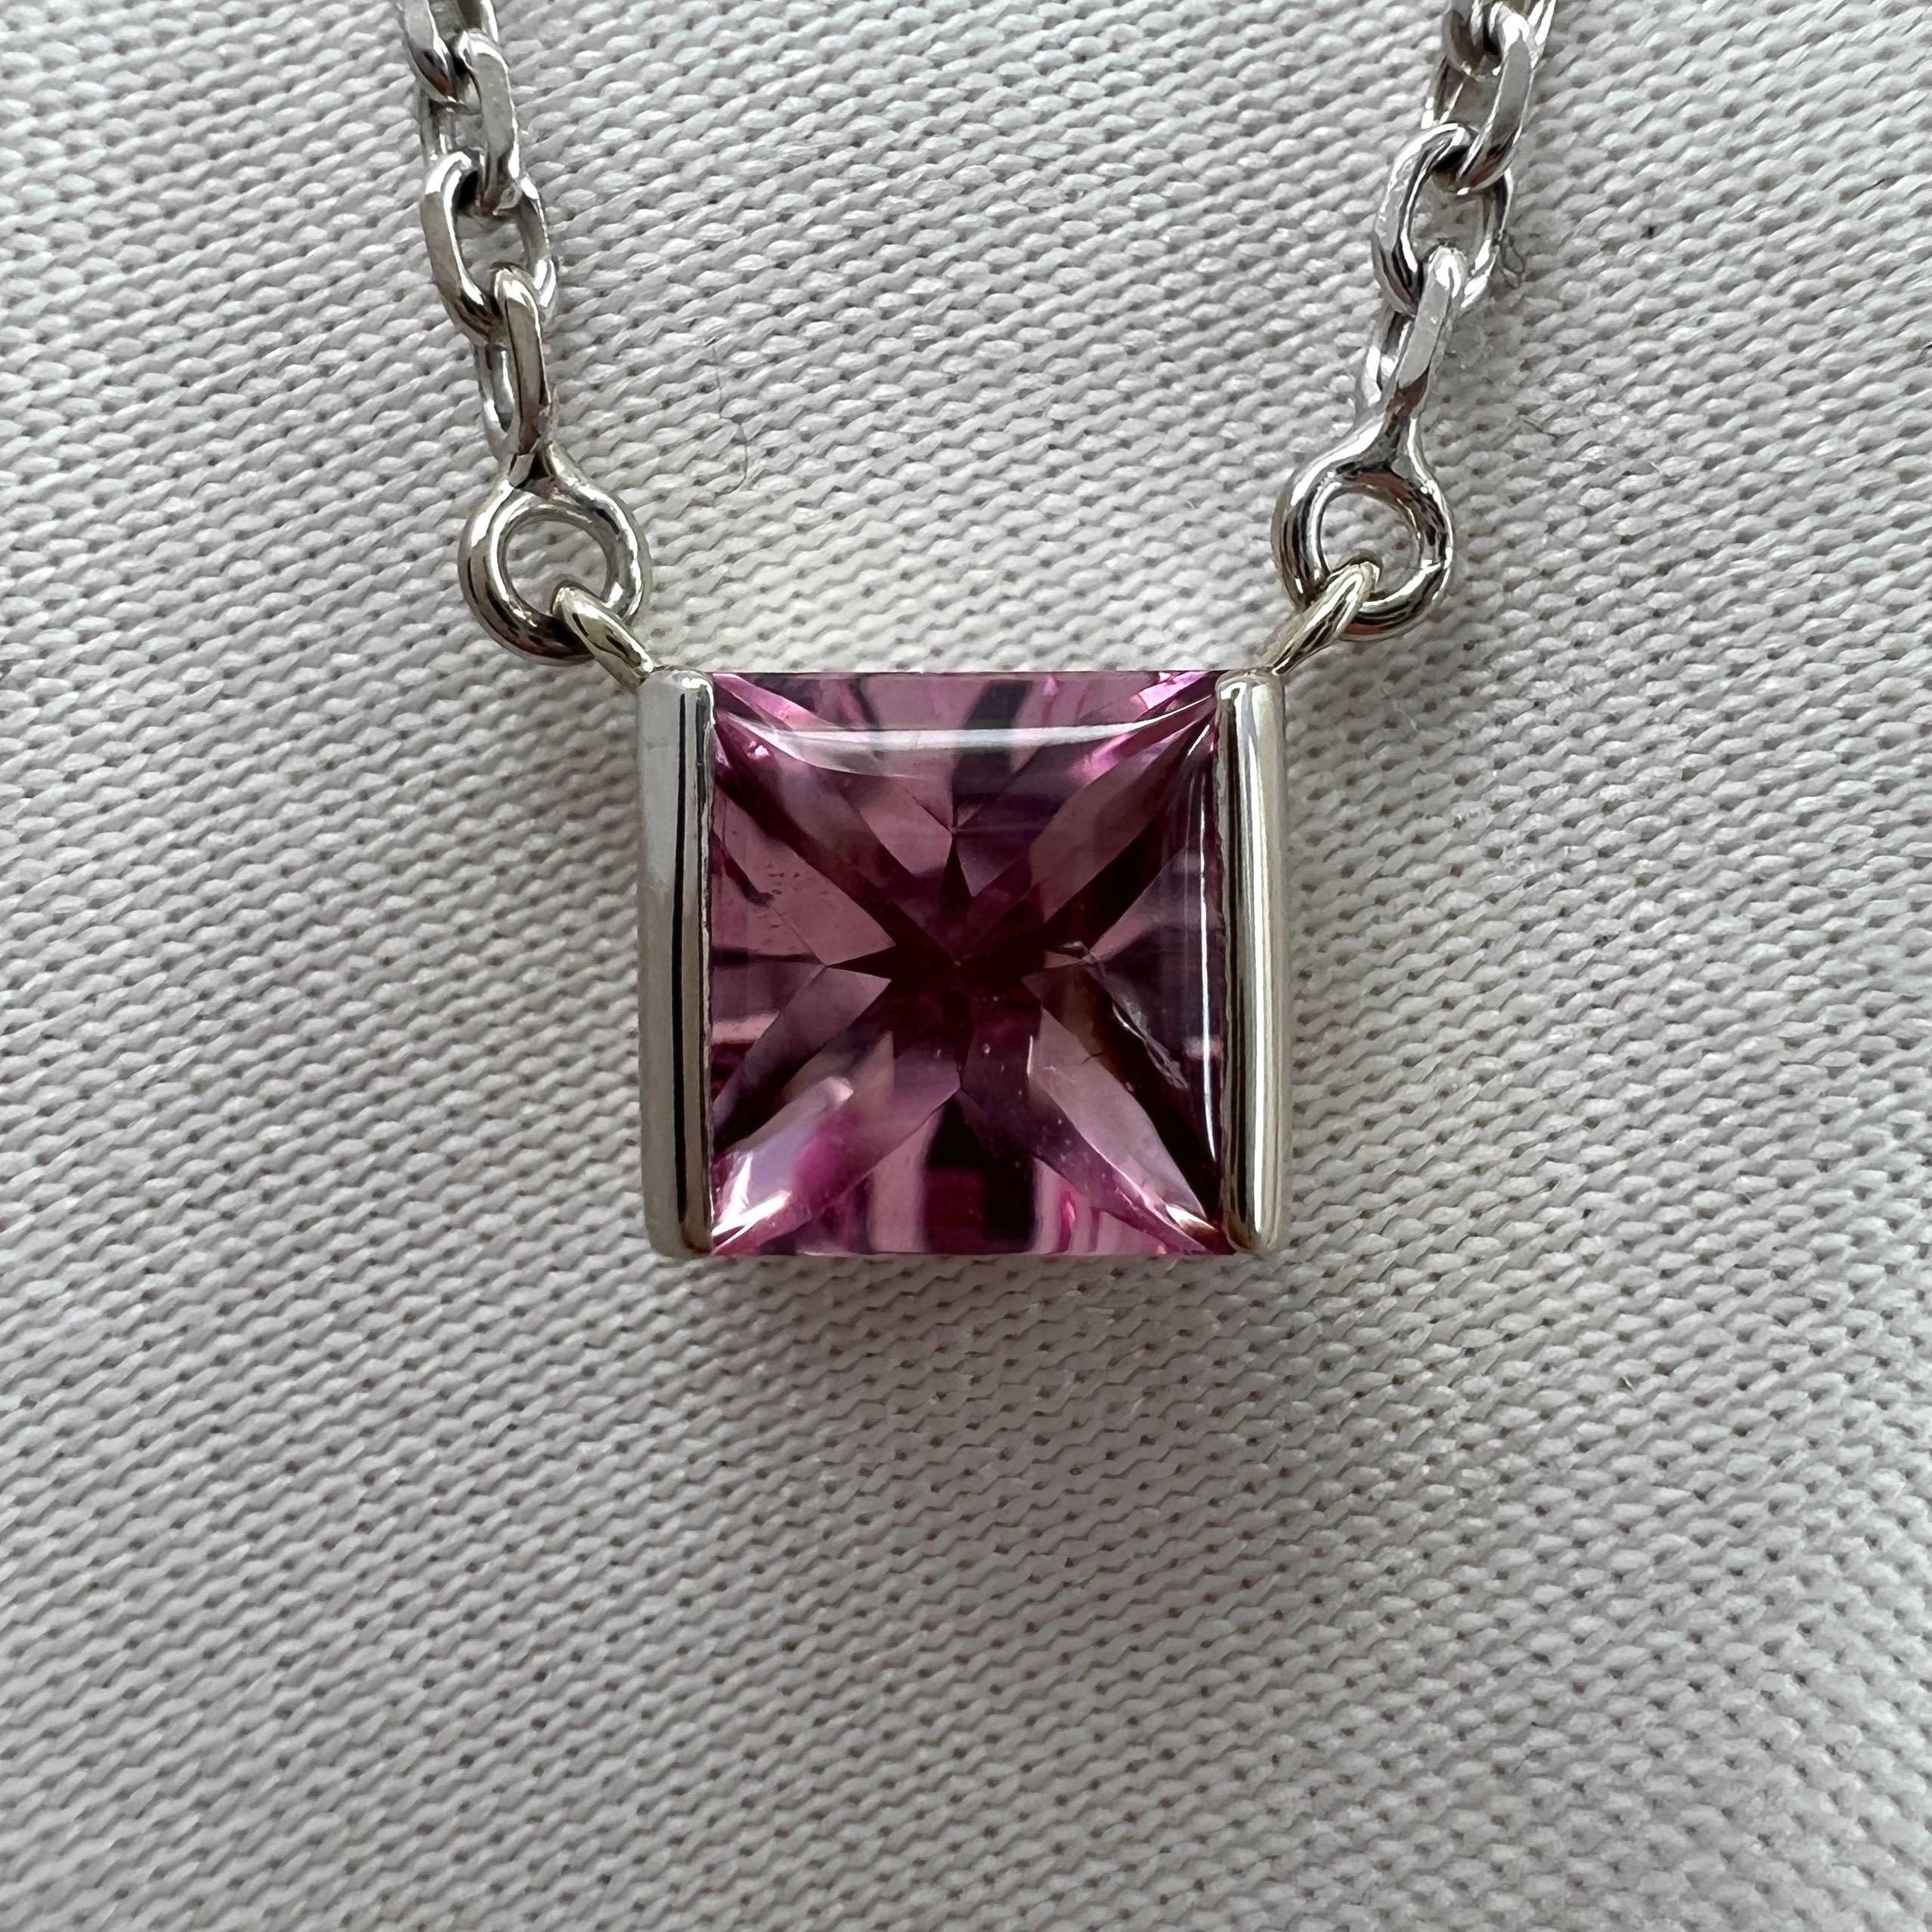 Vintage Pink Rubellite Tourmaline 18 Karat White Gold Pendant Necklace.

Stunning white gold pendant set with a 5.6mm tension set fine pink rubellite tourmaline. 

Fine jewellery houses like Cartier only use the finest of gemstones and this